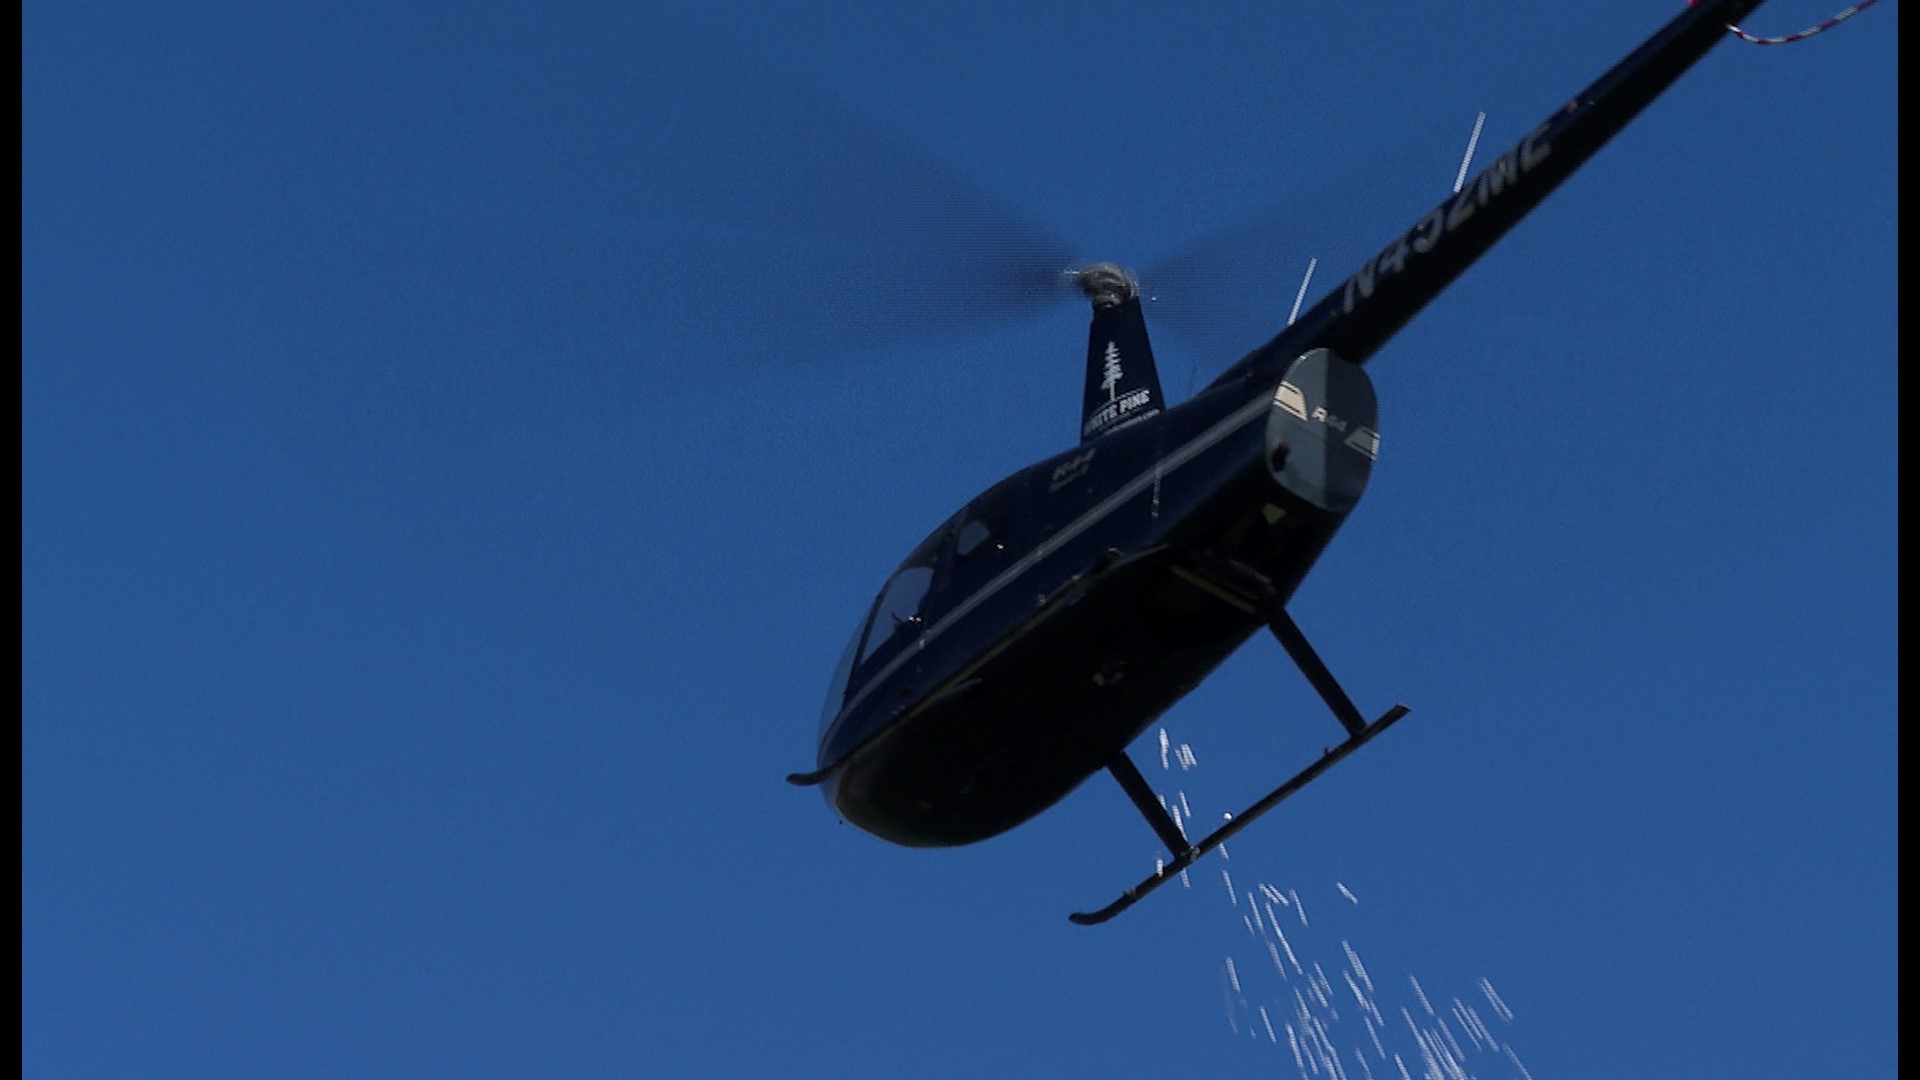 It rained marshmallows at a suburban Detroit park on Friday as children raced to snatch up thousands of the gooey treats being dropped from a helicopter.